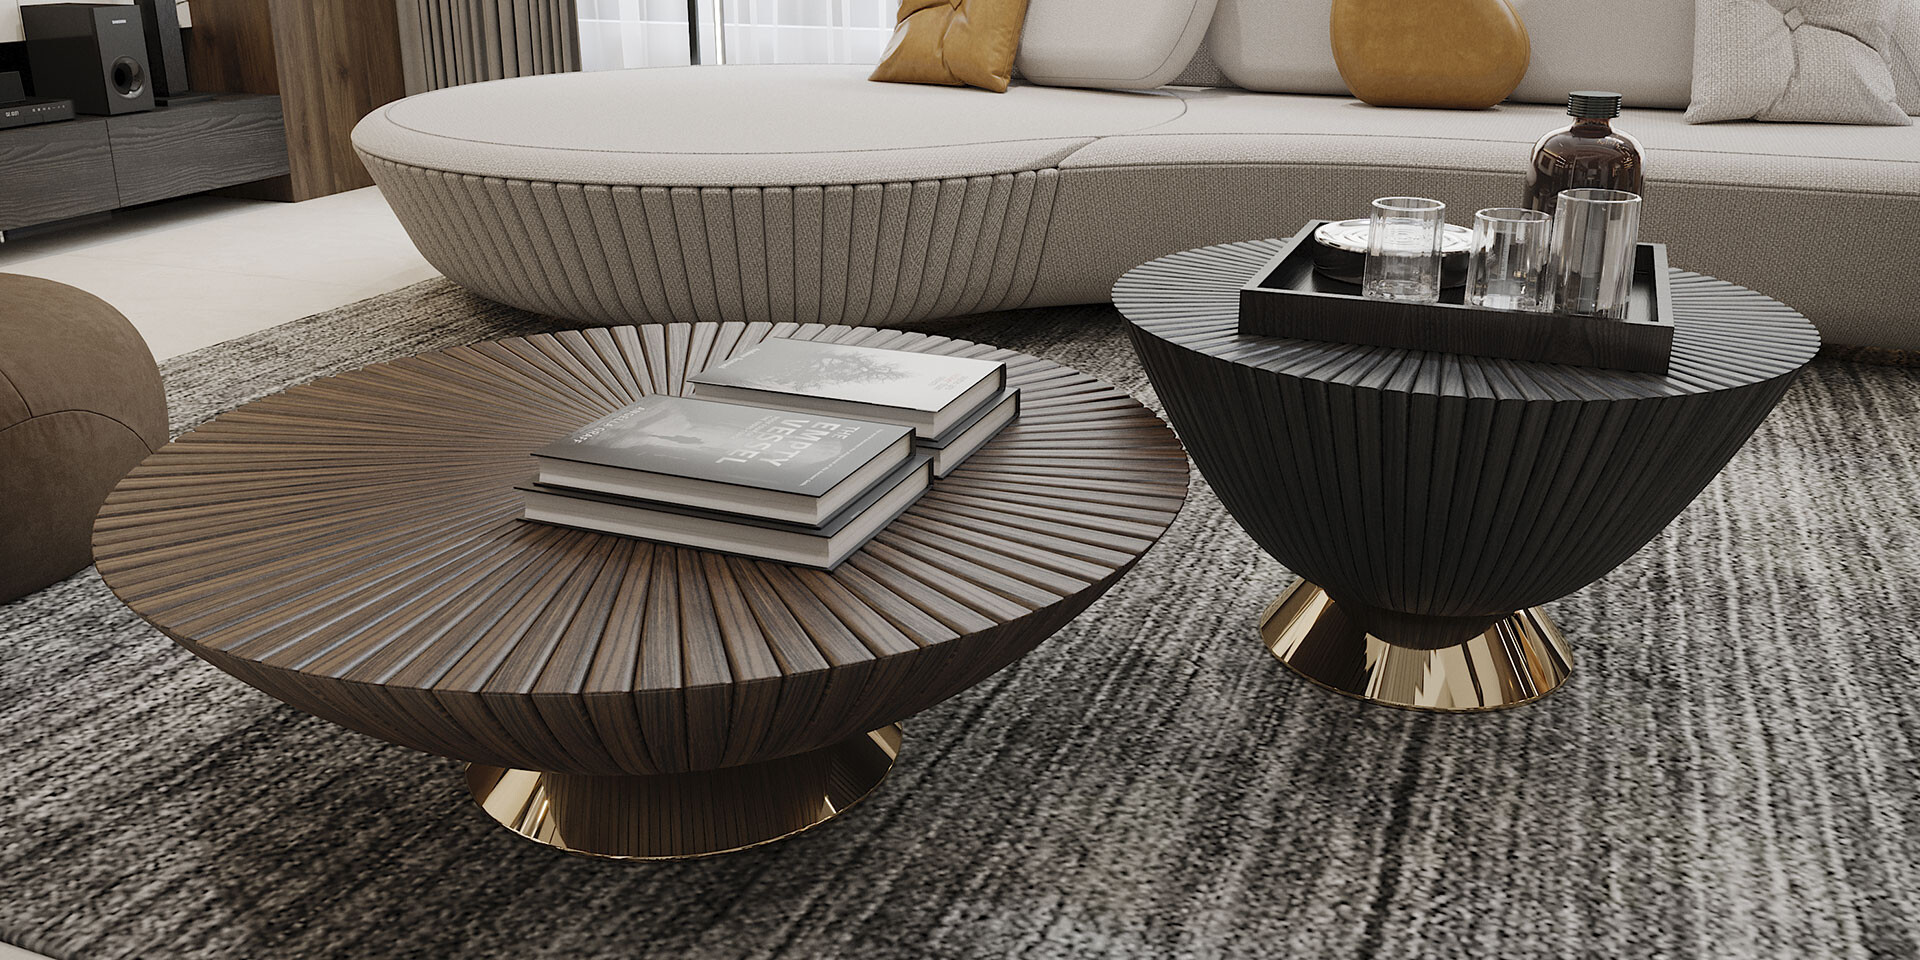 GOATHI COFFEE TABLE Living Room Detail View ALMA de LUCE